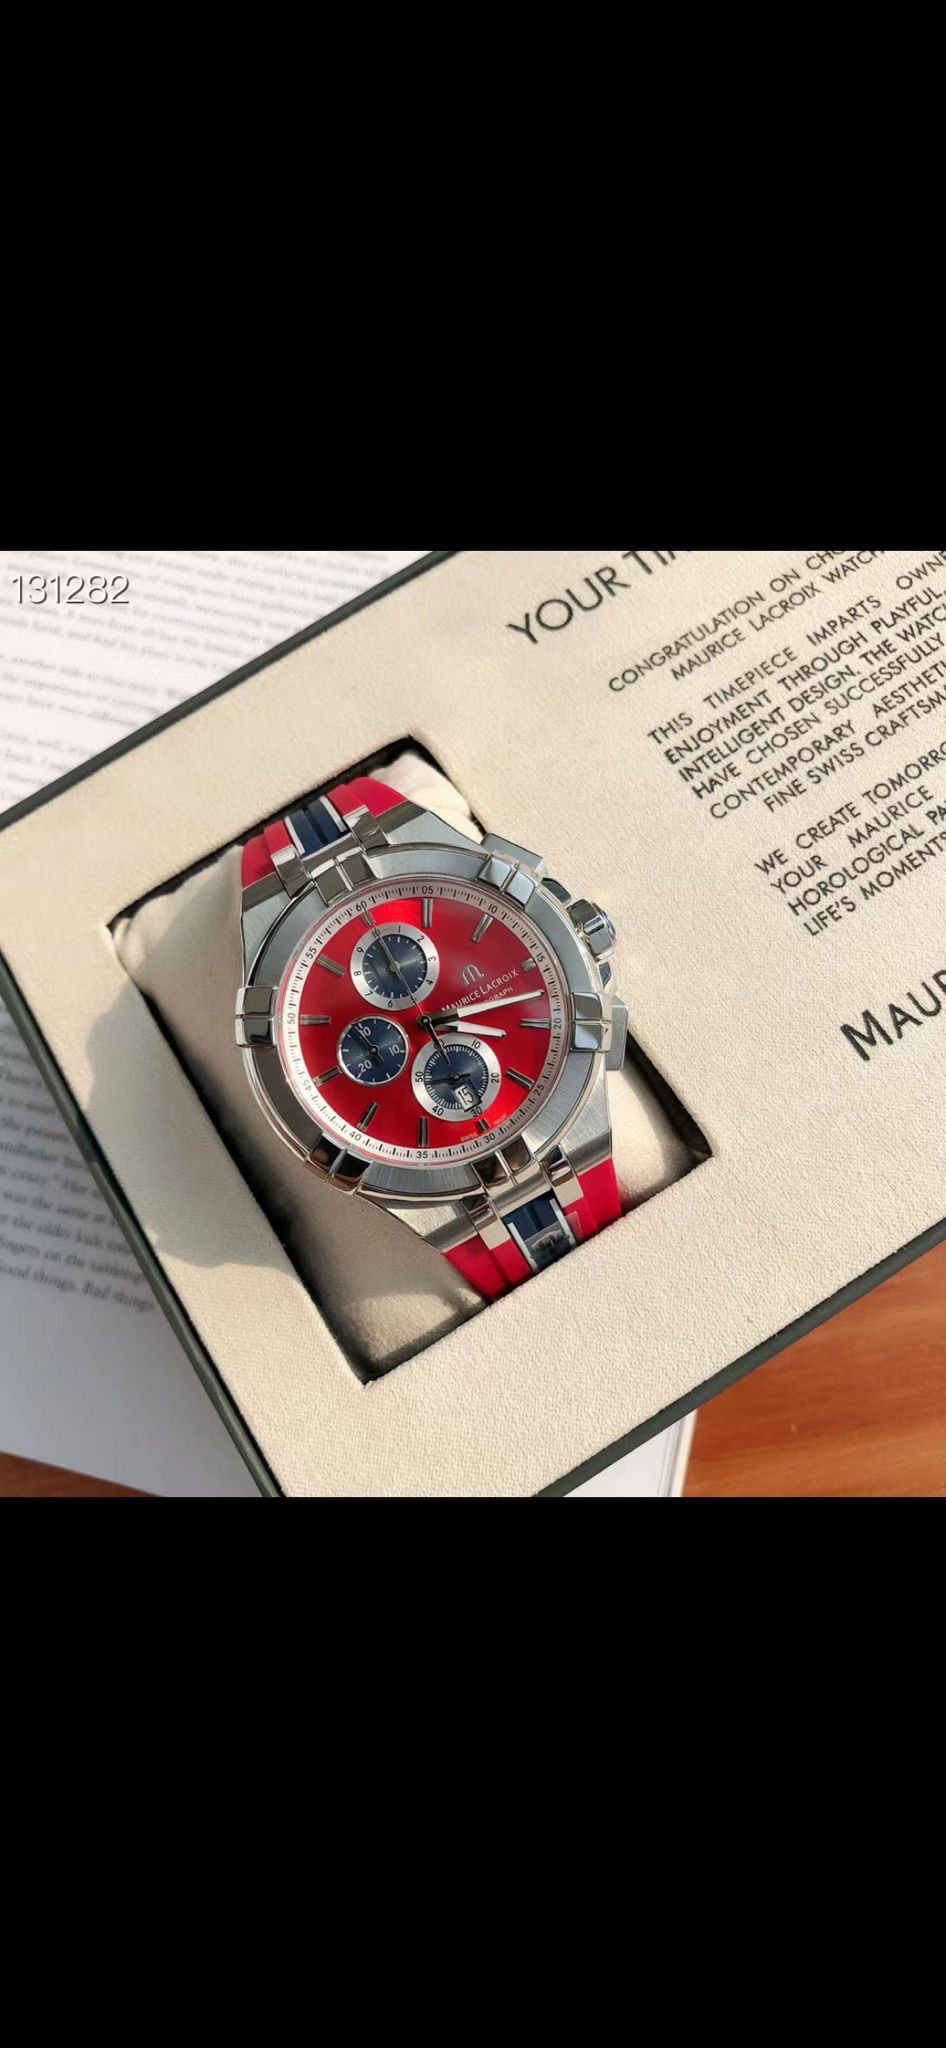 MM0665- Maurice Lacroix Vikins Limited Edition